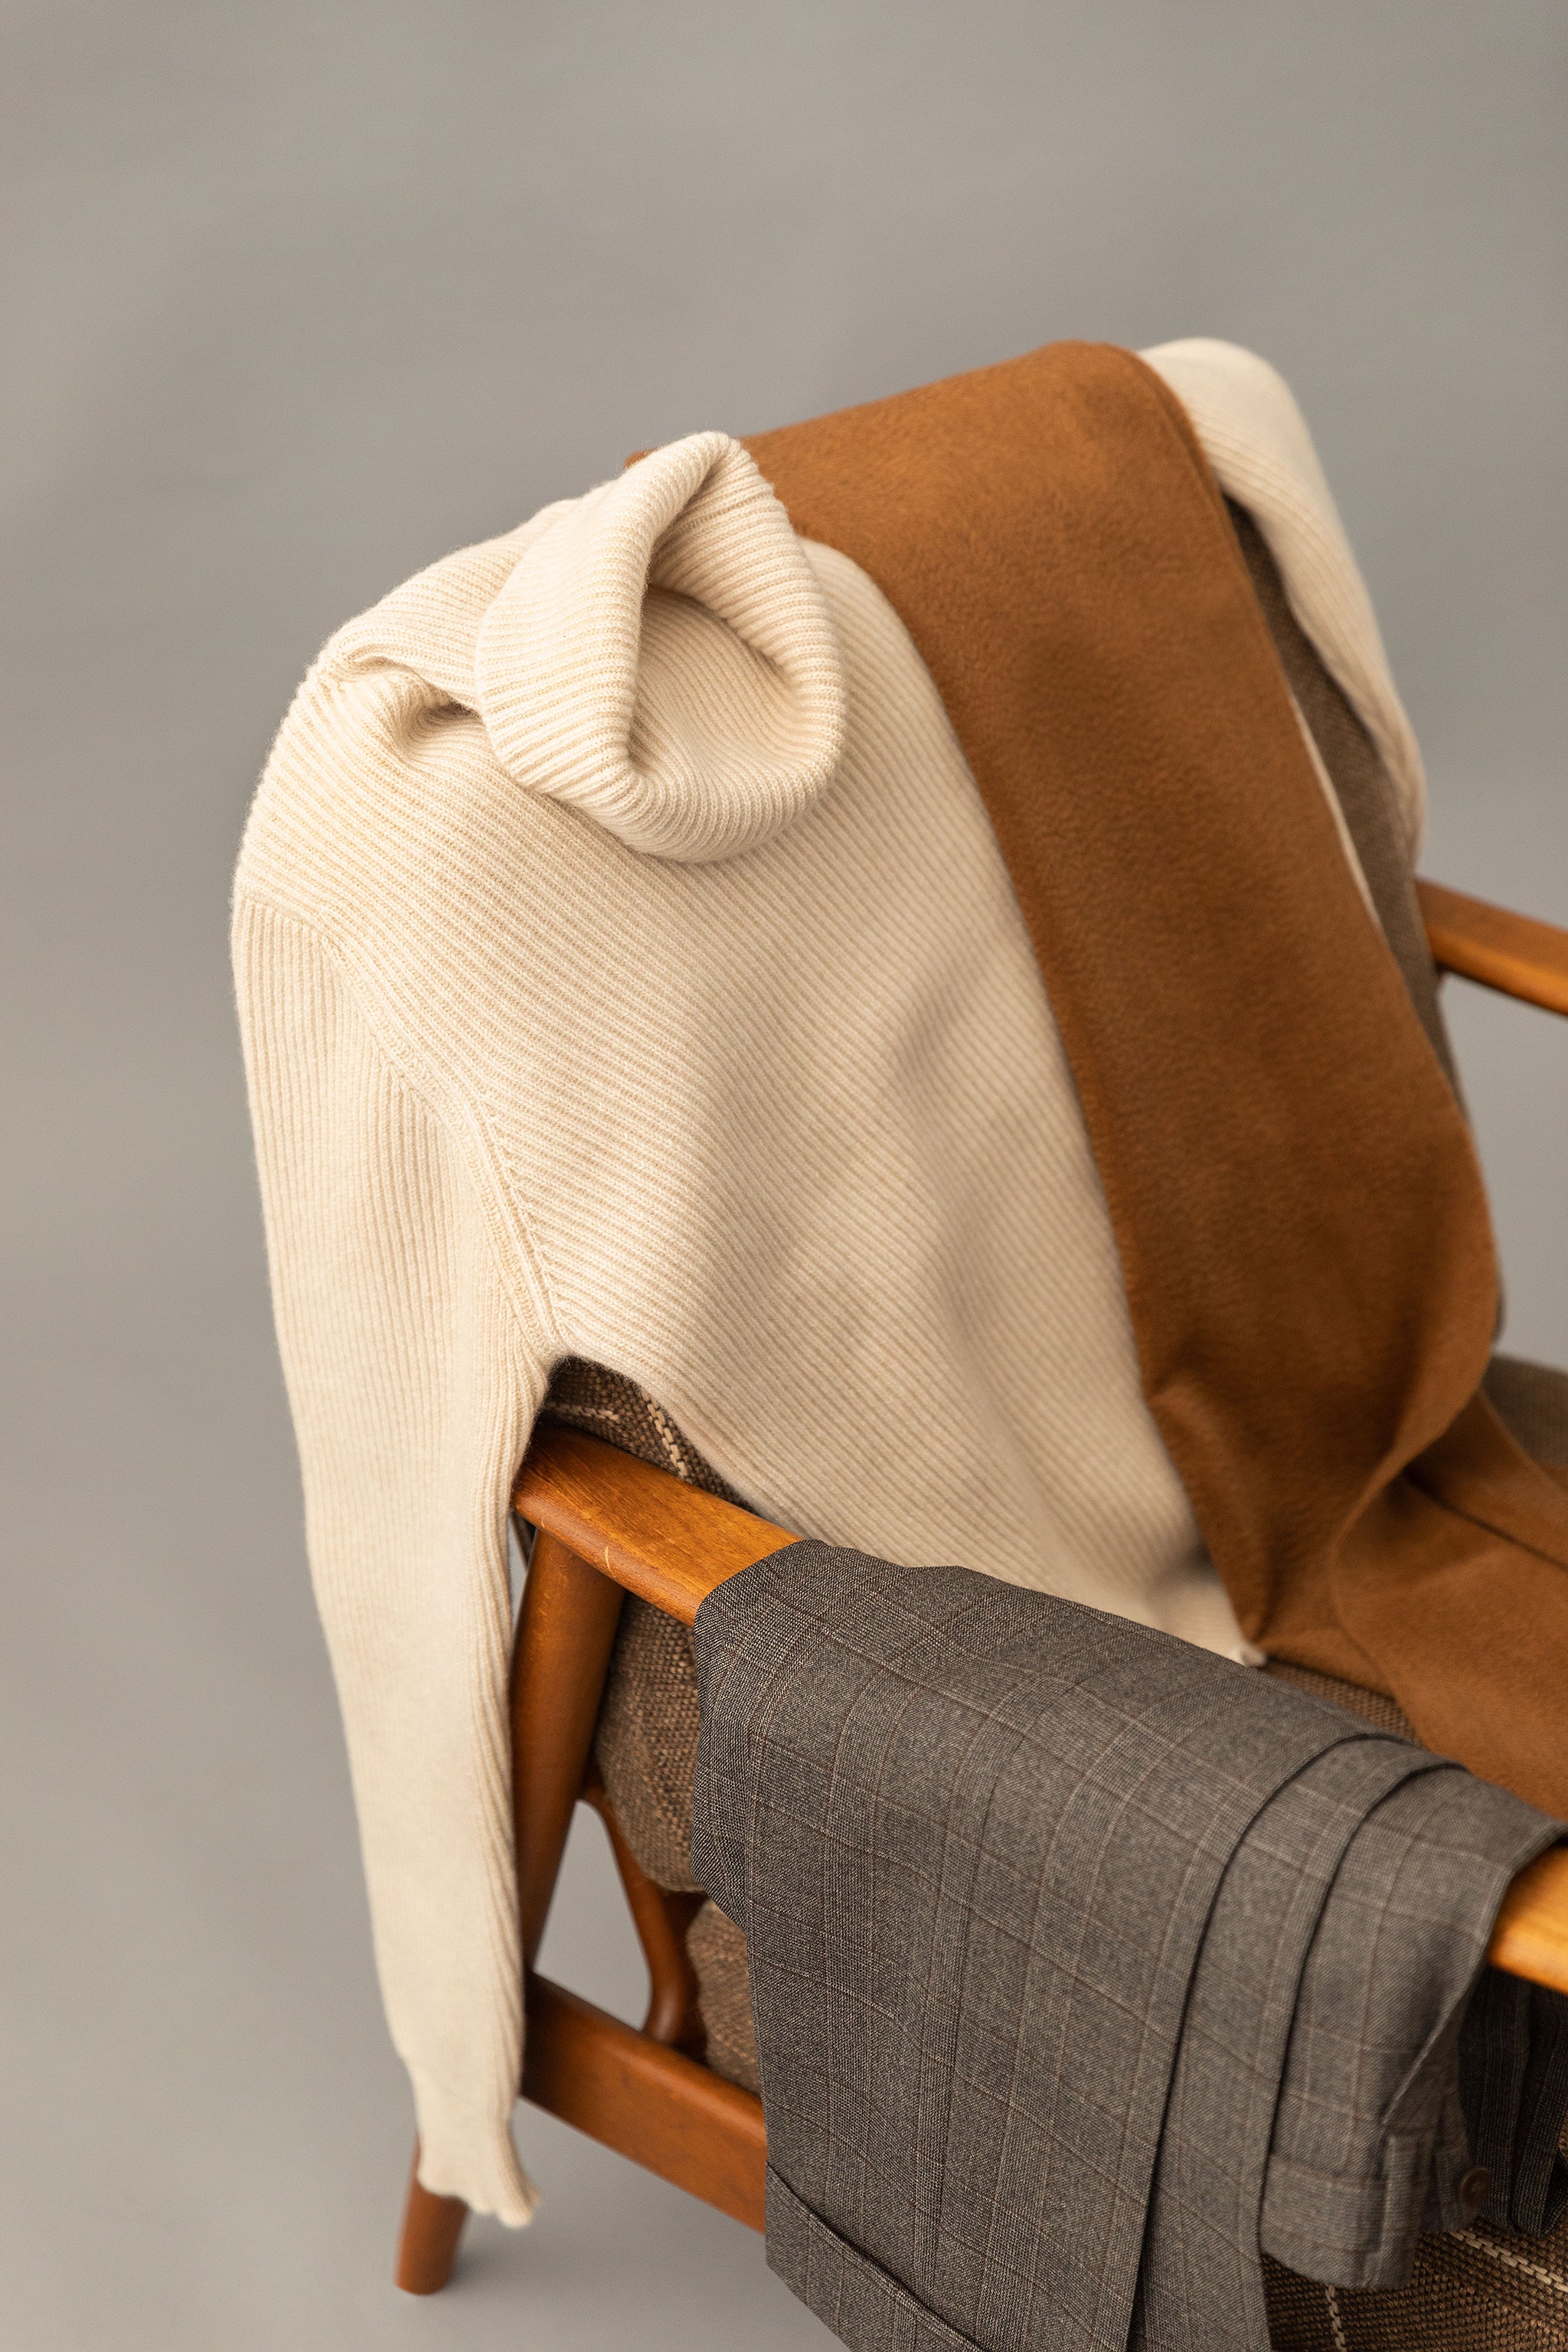 Woven cashmere scarf in saddle brown - Colhay's